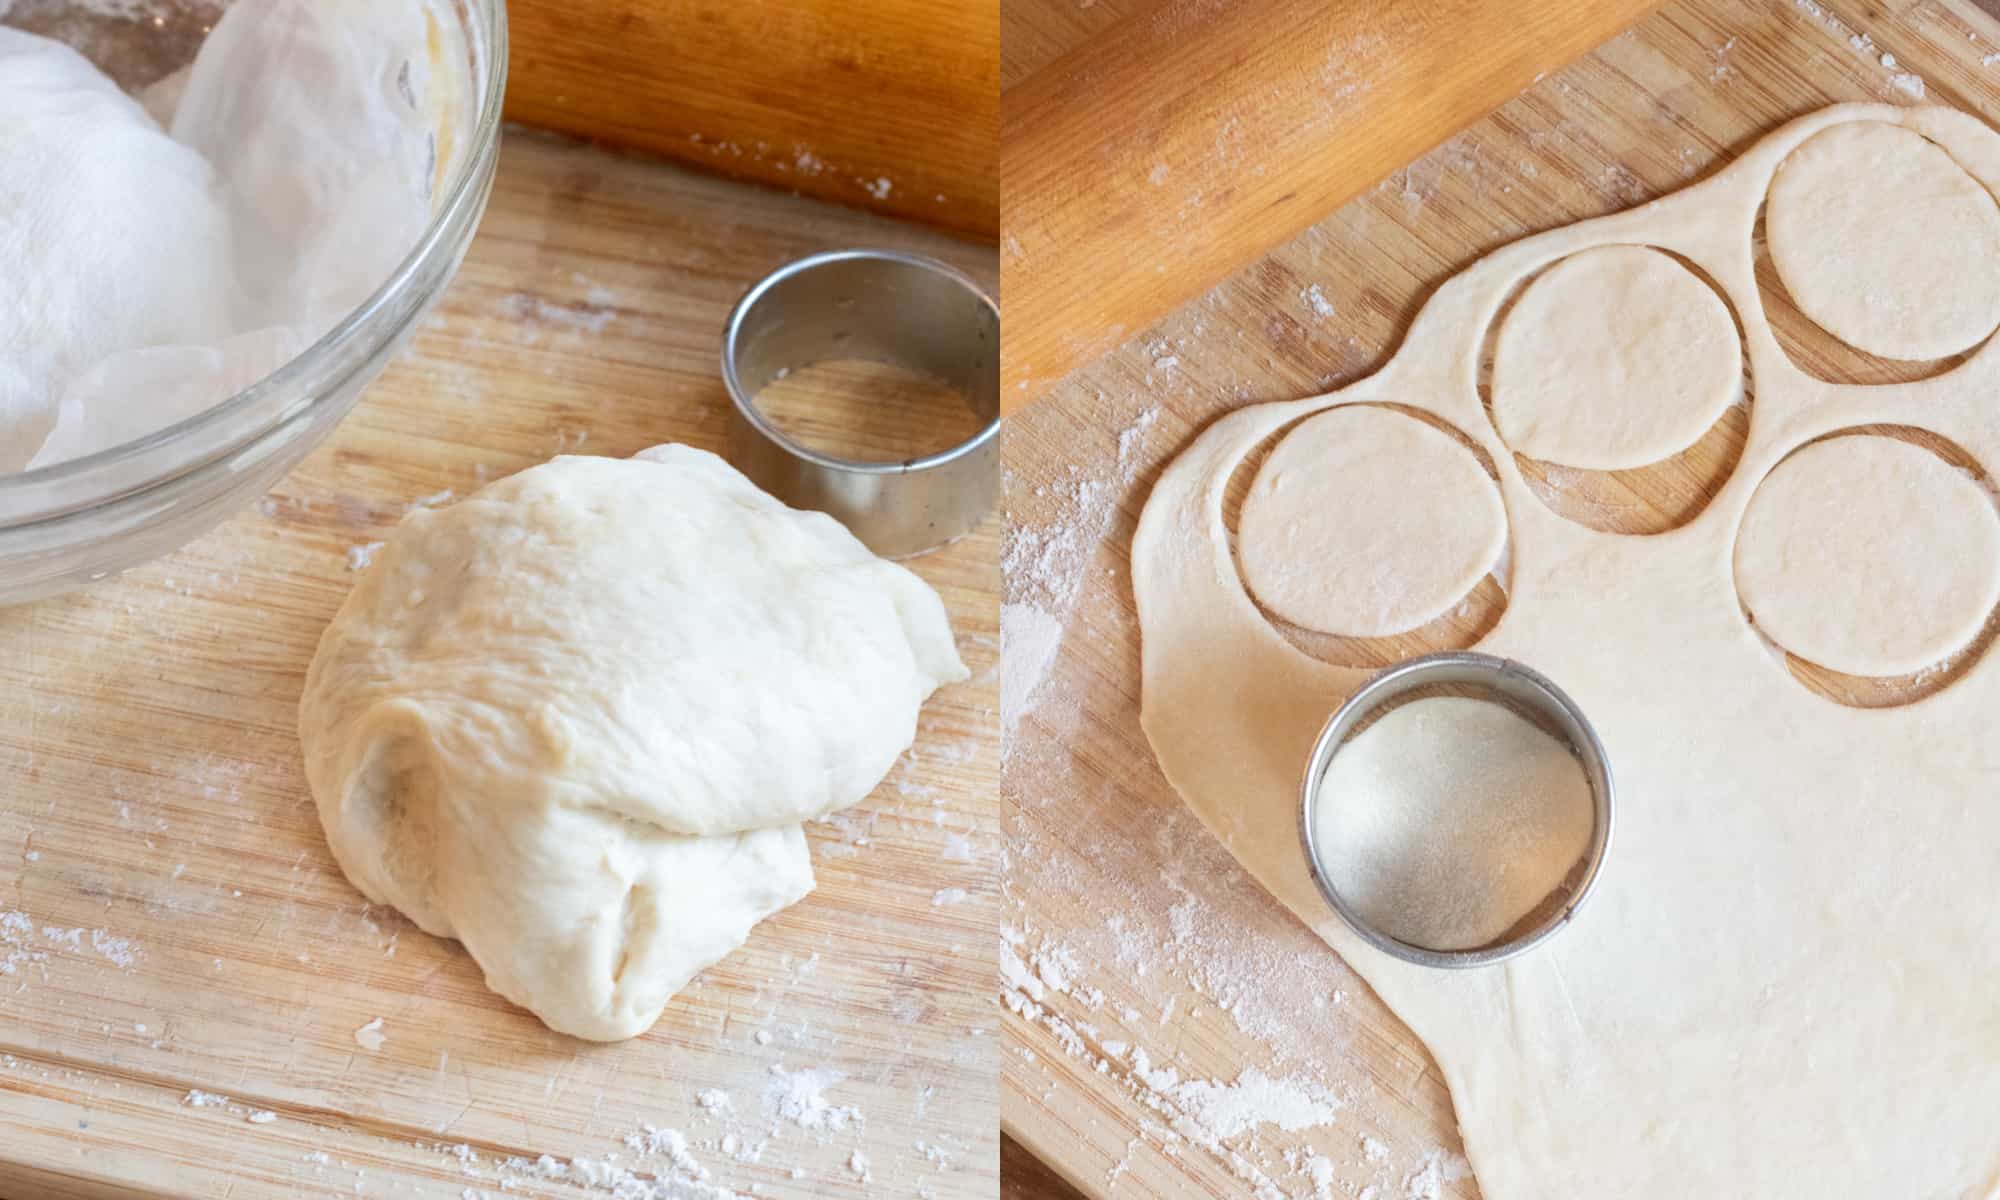 dough on a cutting board next to a bowl and then dough rolled out with a circle cutter cutting out circles in the dough.